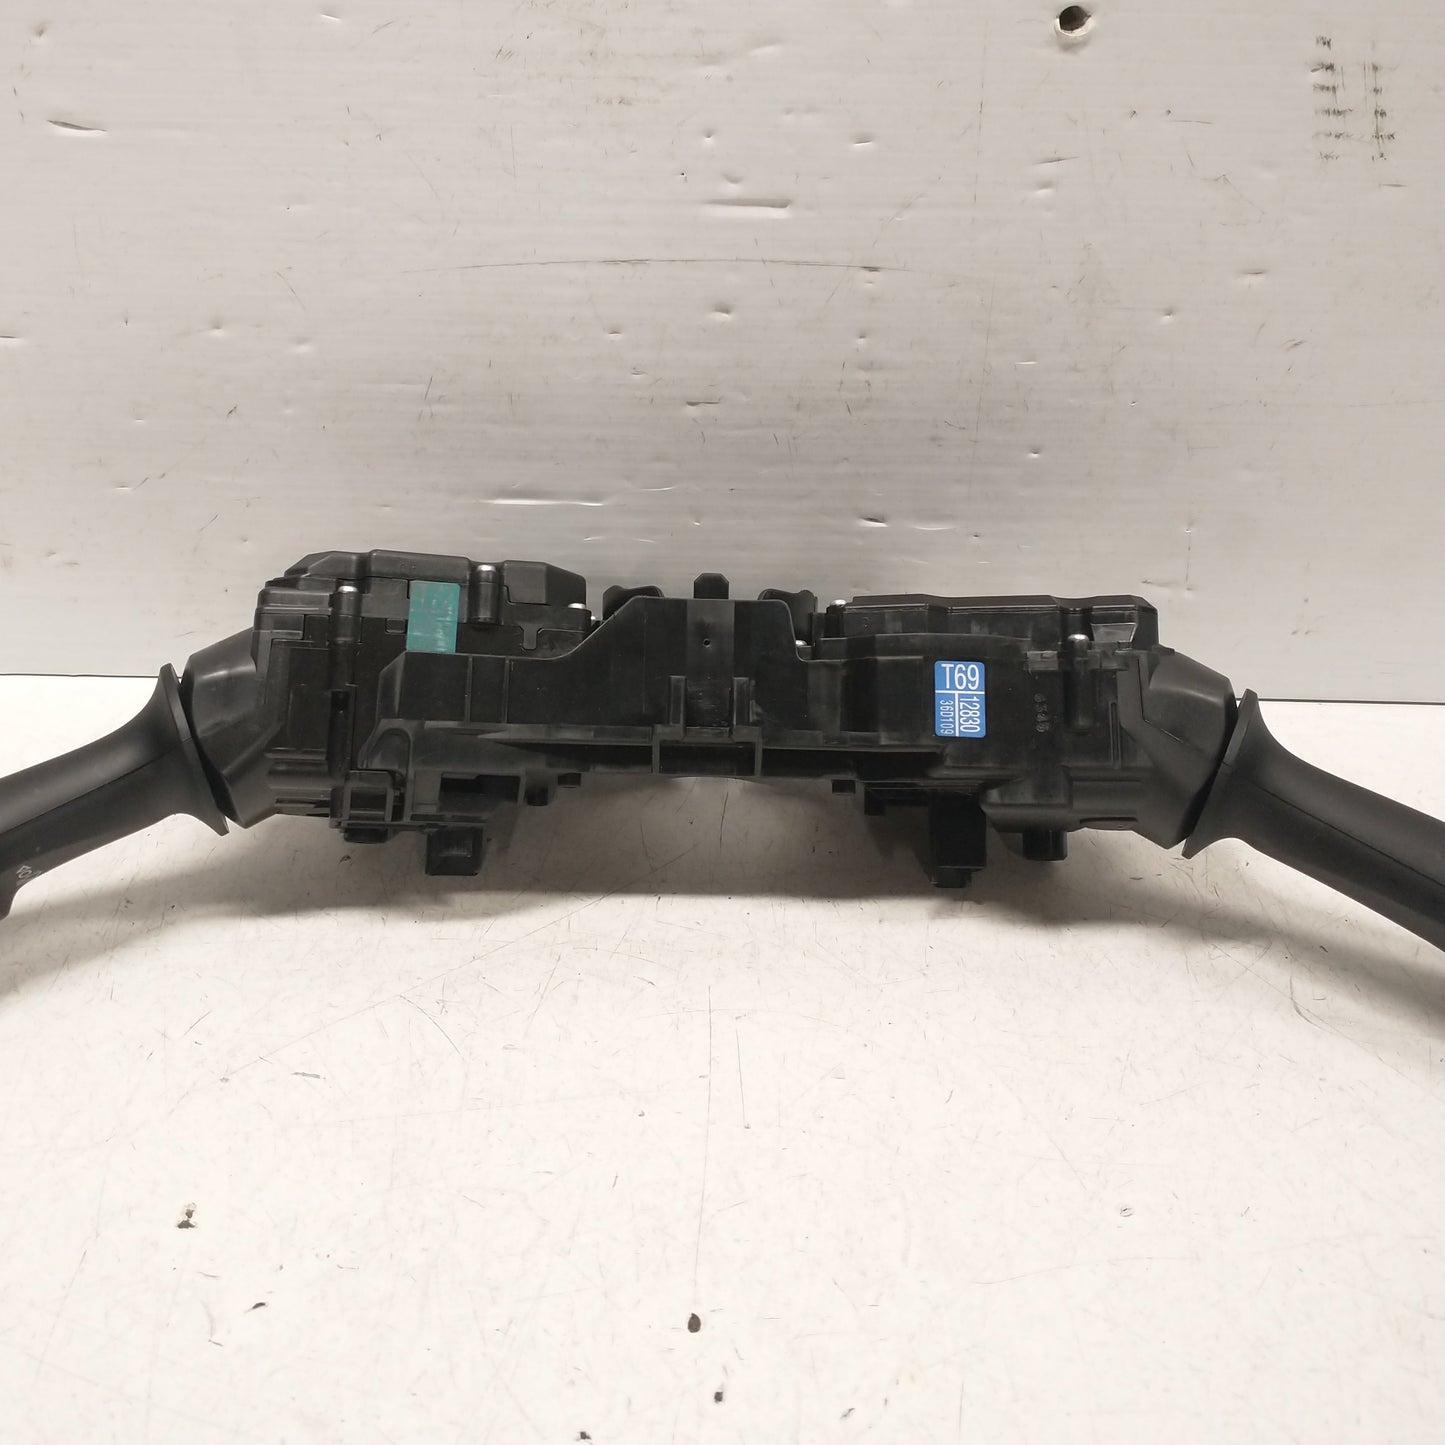 Toyota Corolla Hatchback Combination Switch ZRE182R 2012 2013 2014 2015